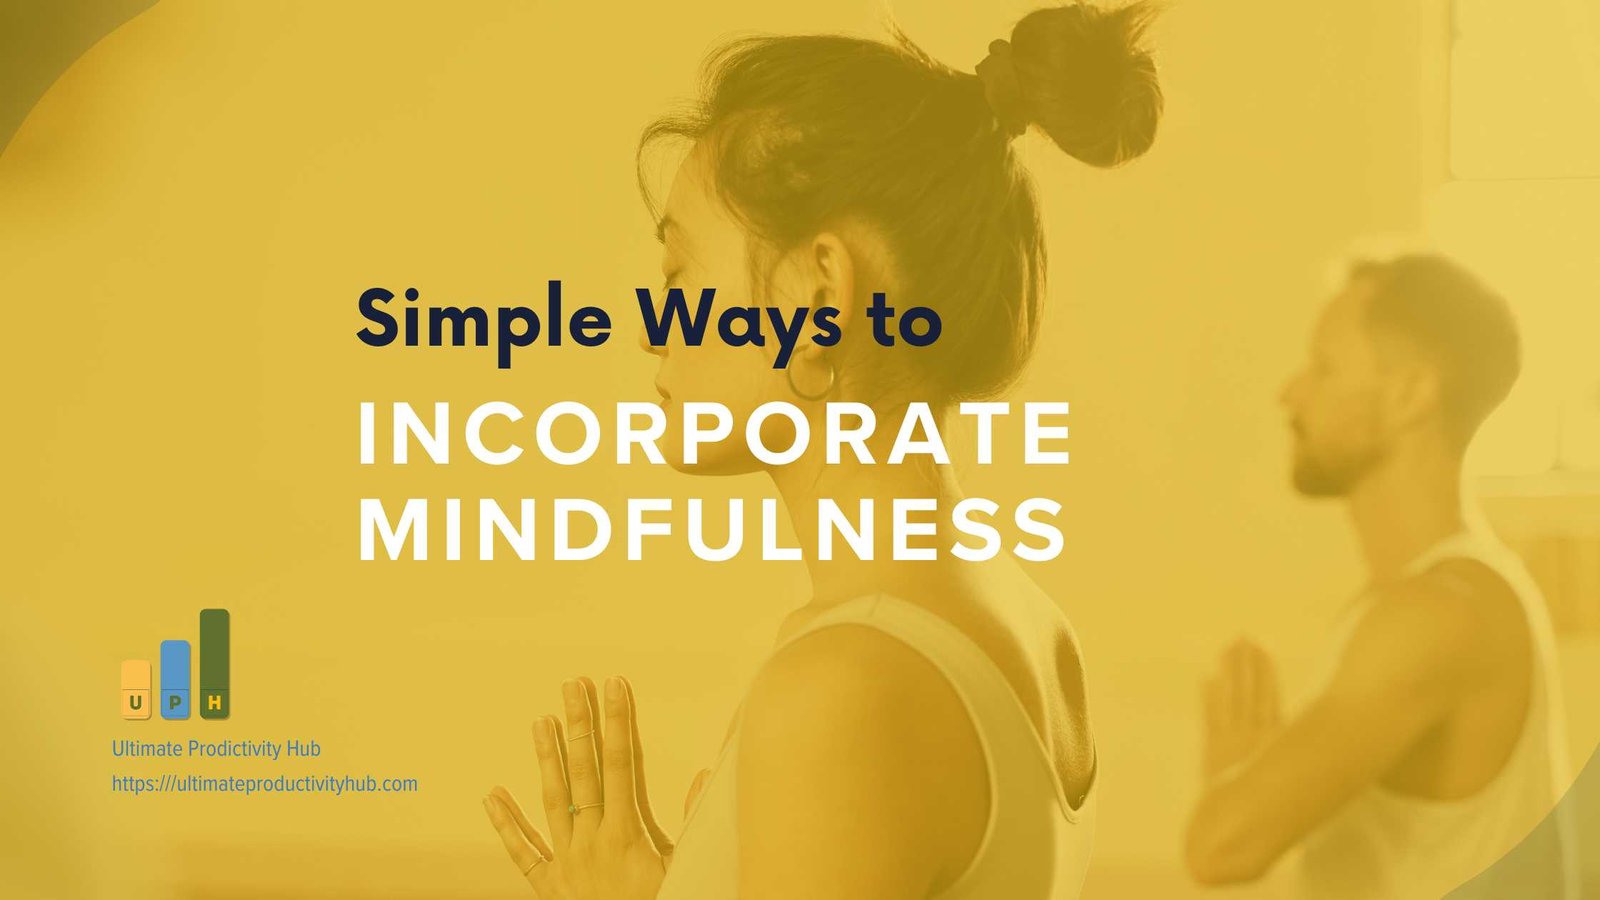 Simple Ways to Incorporate Mindfulness